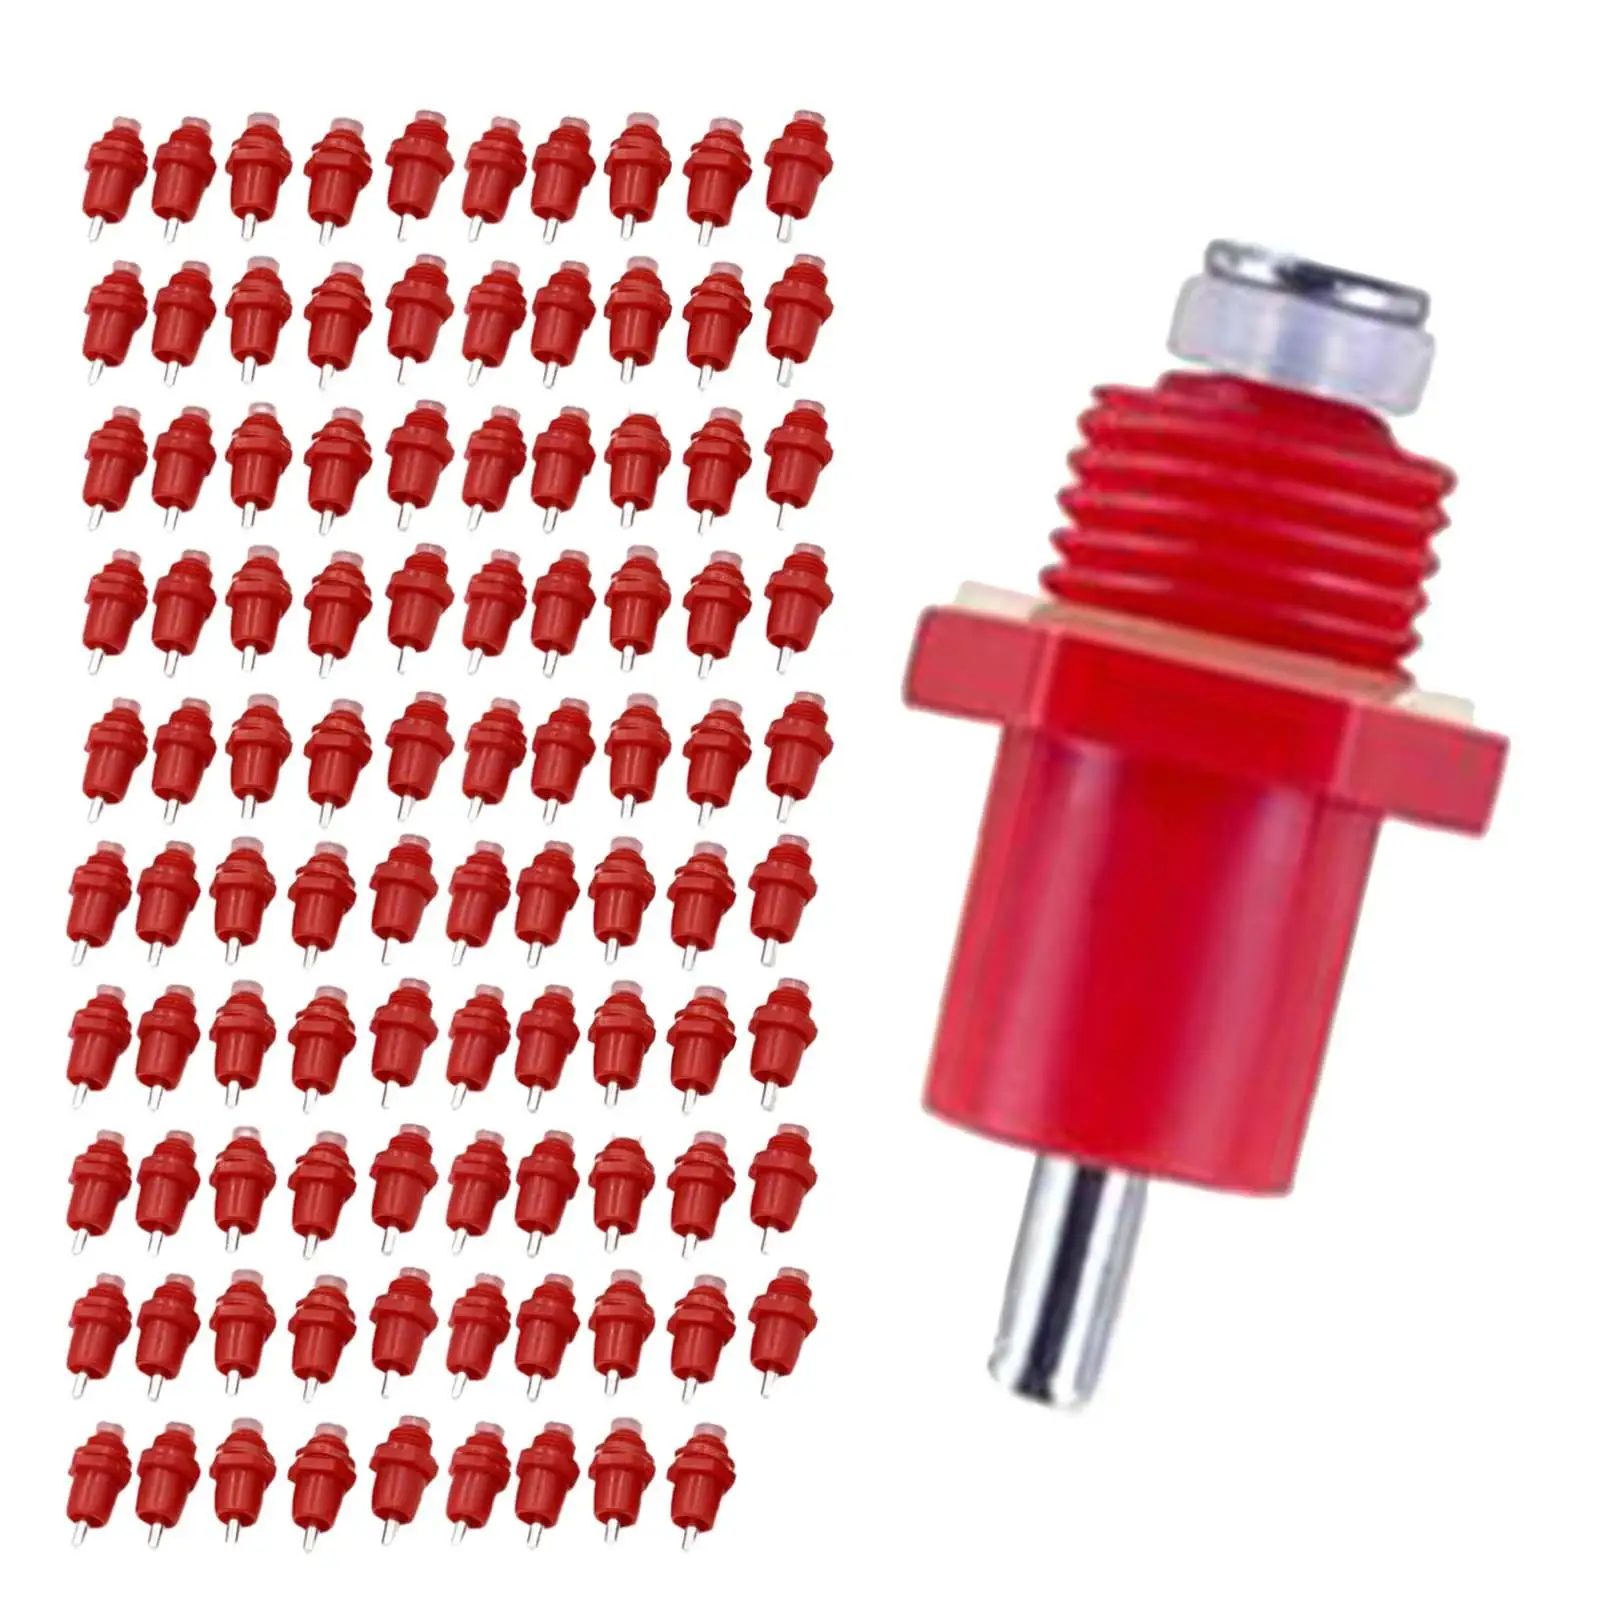 100 Pieces Automatic Poultry Water Nipple Drinker Screw in 360 Degree Water